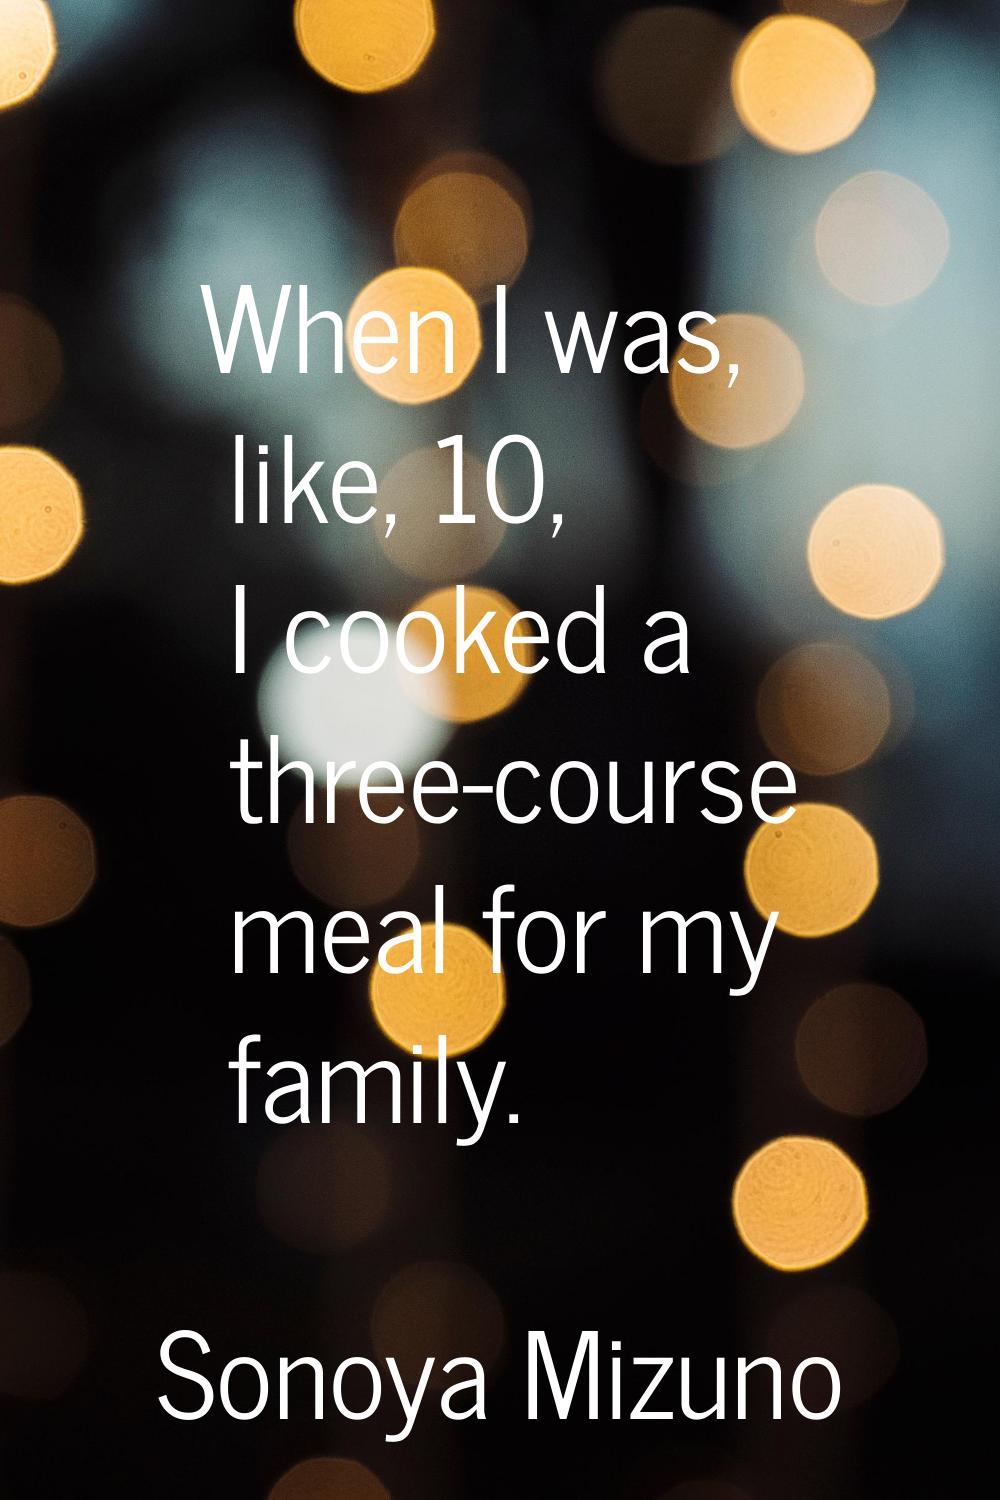 When I was, like, 10, I cooked a three-course meal for my family.